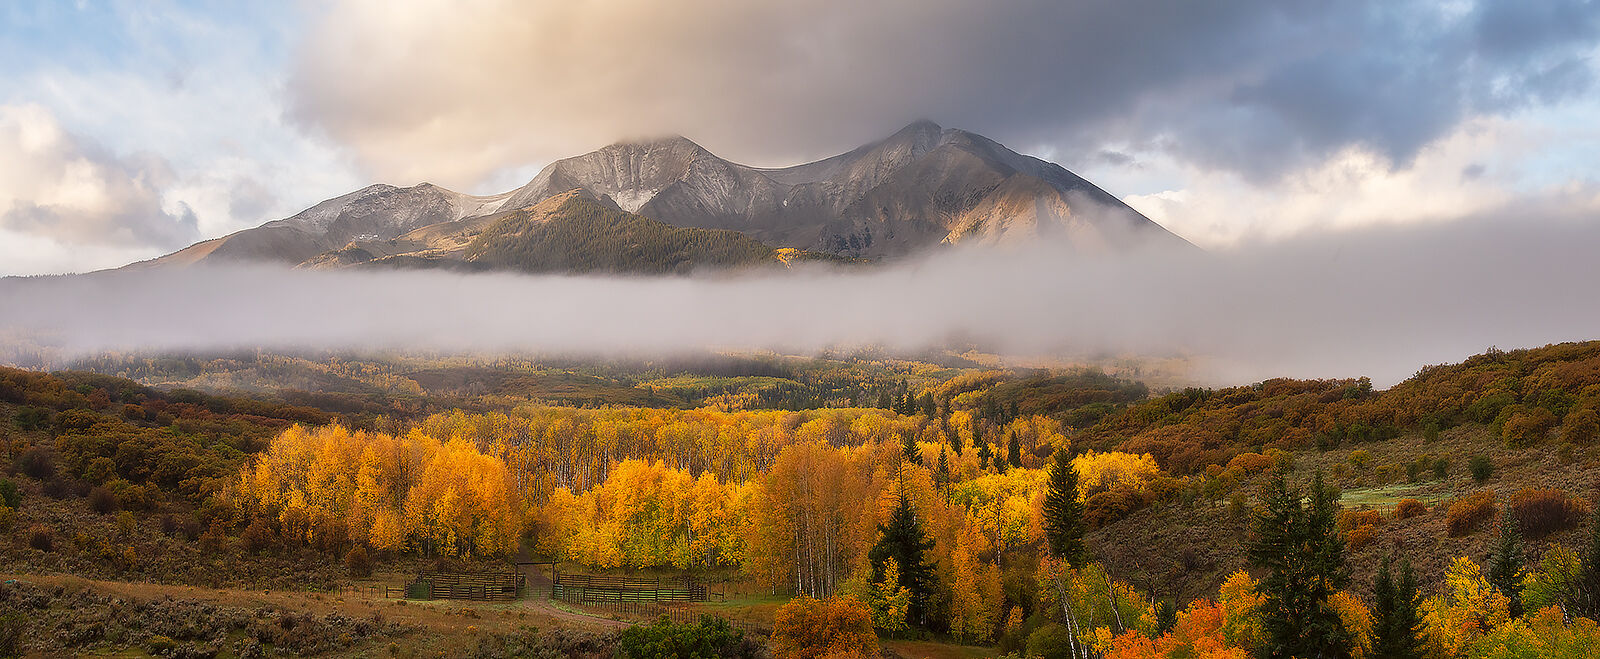 Low clouds hang in front of the mountain peaks as the sun shines on yellow aspen trees below.